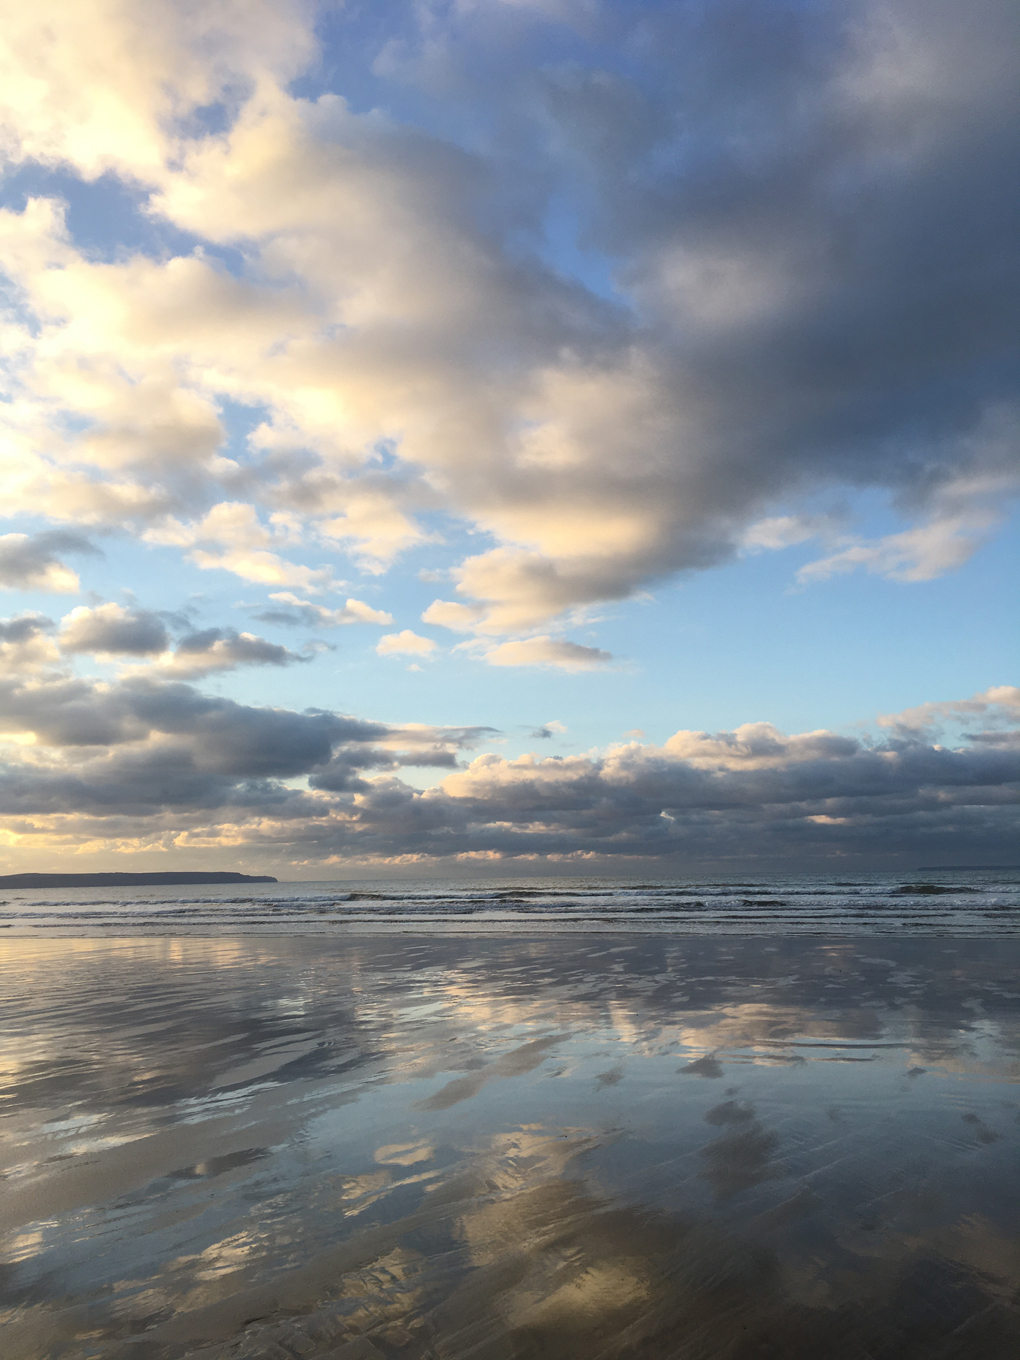 Portrait of clouds reflected in water on Westward Ho! beach at sunset.